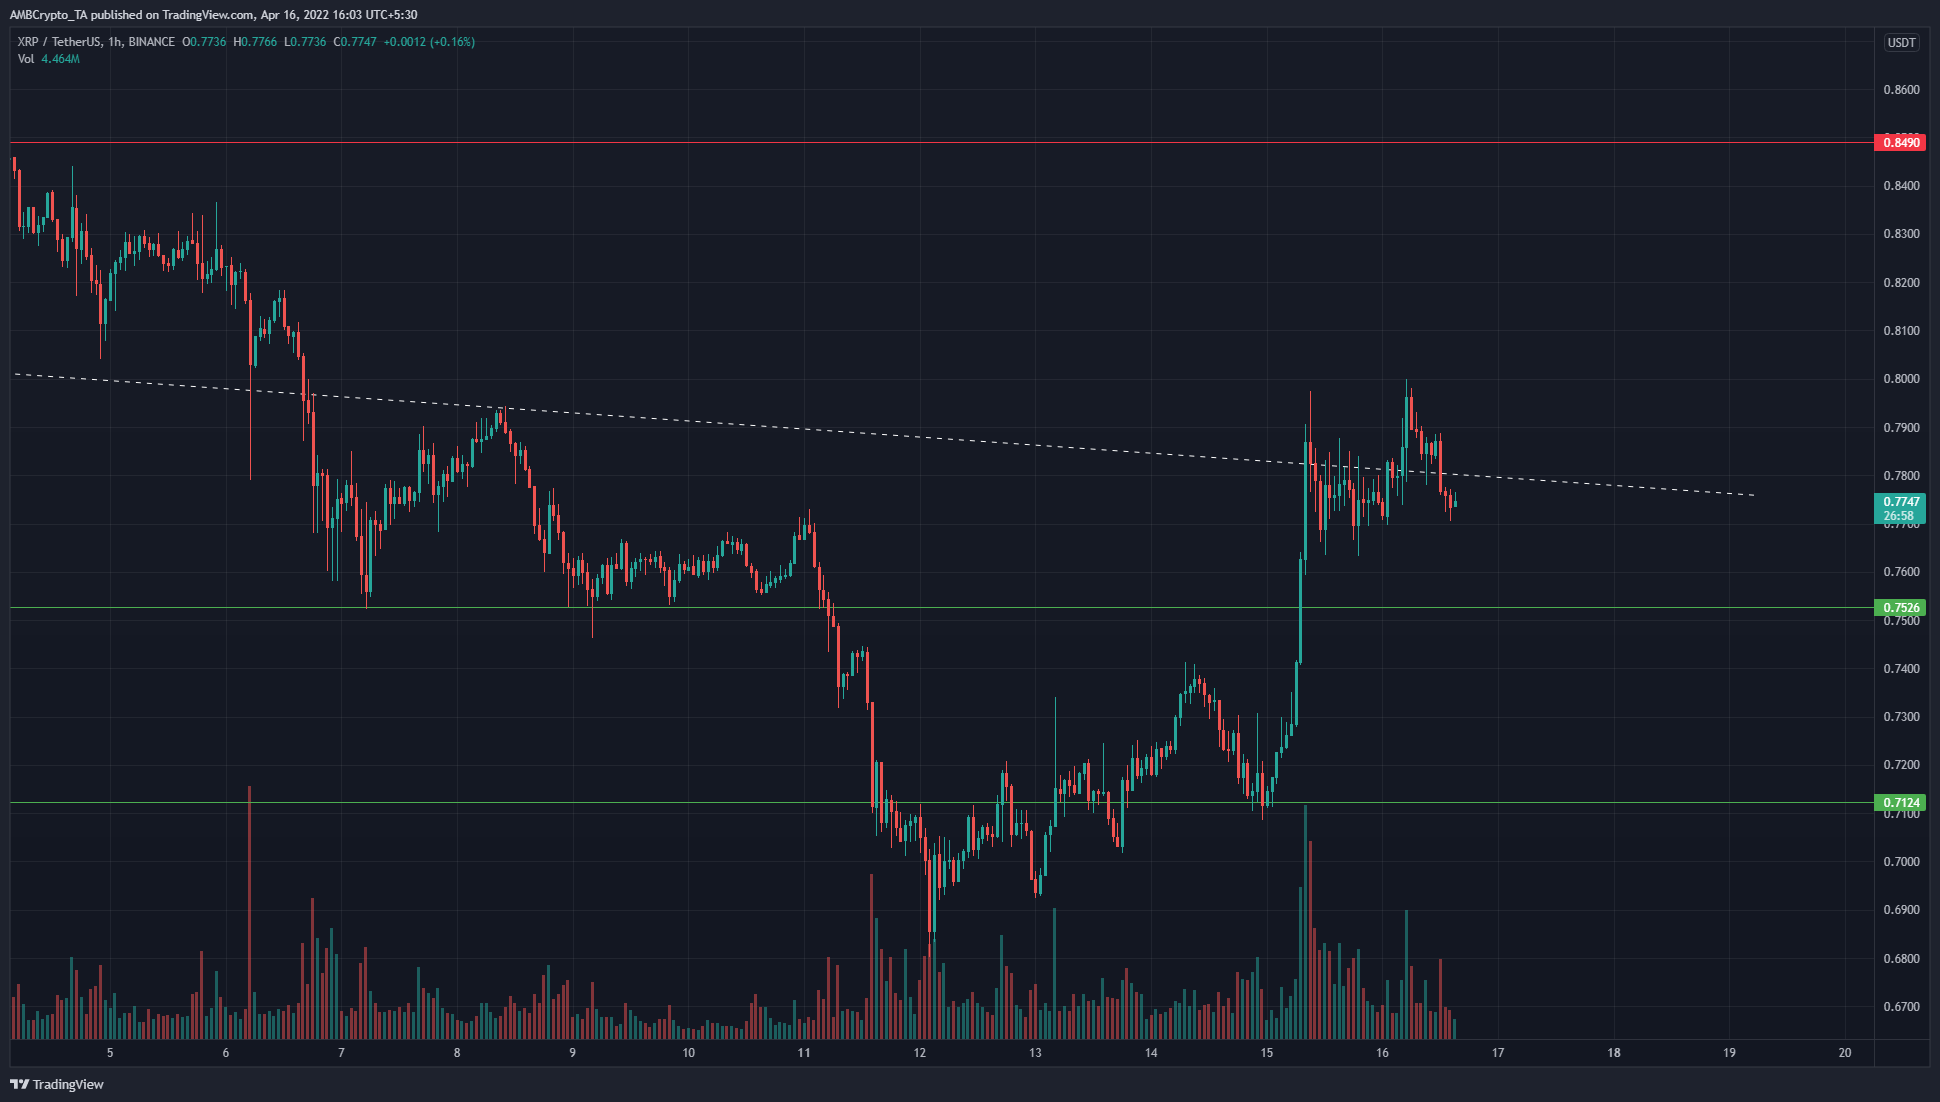 XRP presents a buying opportunity once more, as the trendline resistance remains the level to beat